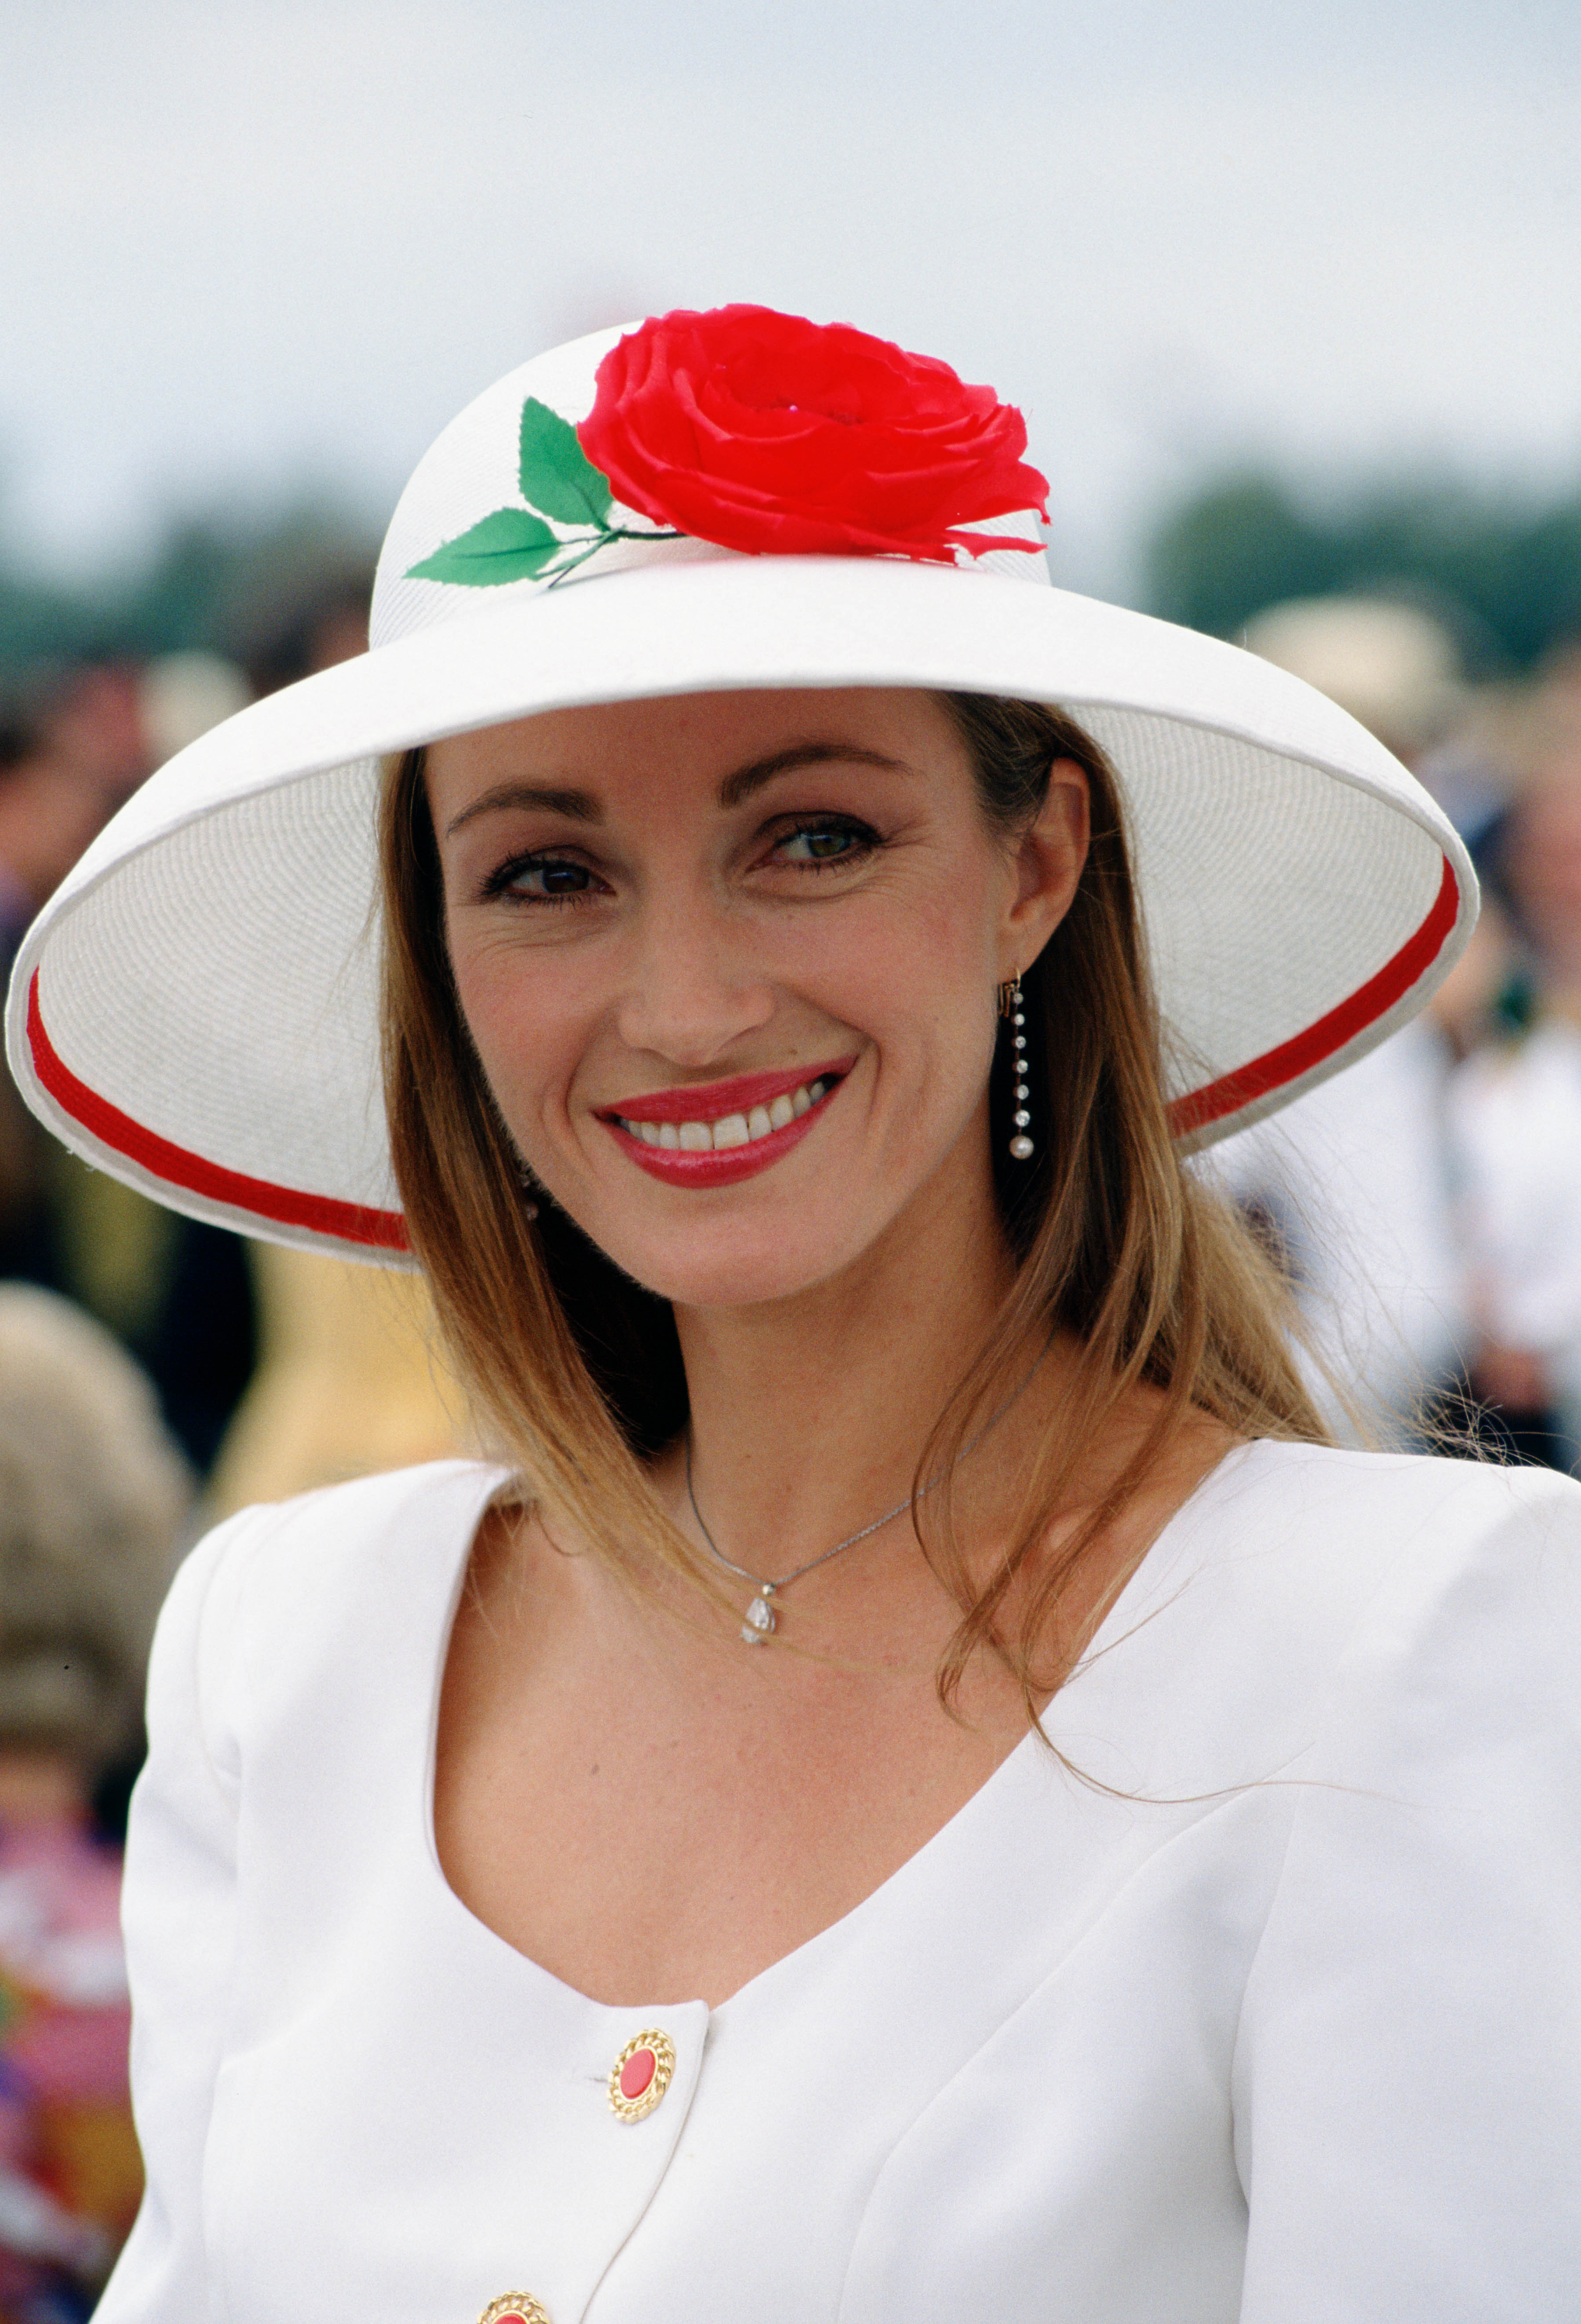 Jane Seymour attend the Cartier Polo Day in Windsor, Berkshire, UK on July 29, 1990. | Source: Getty Images.